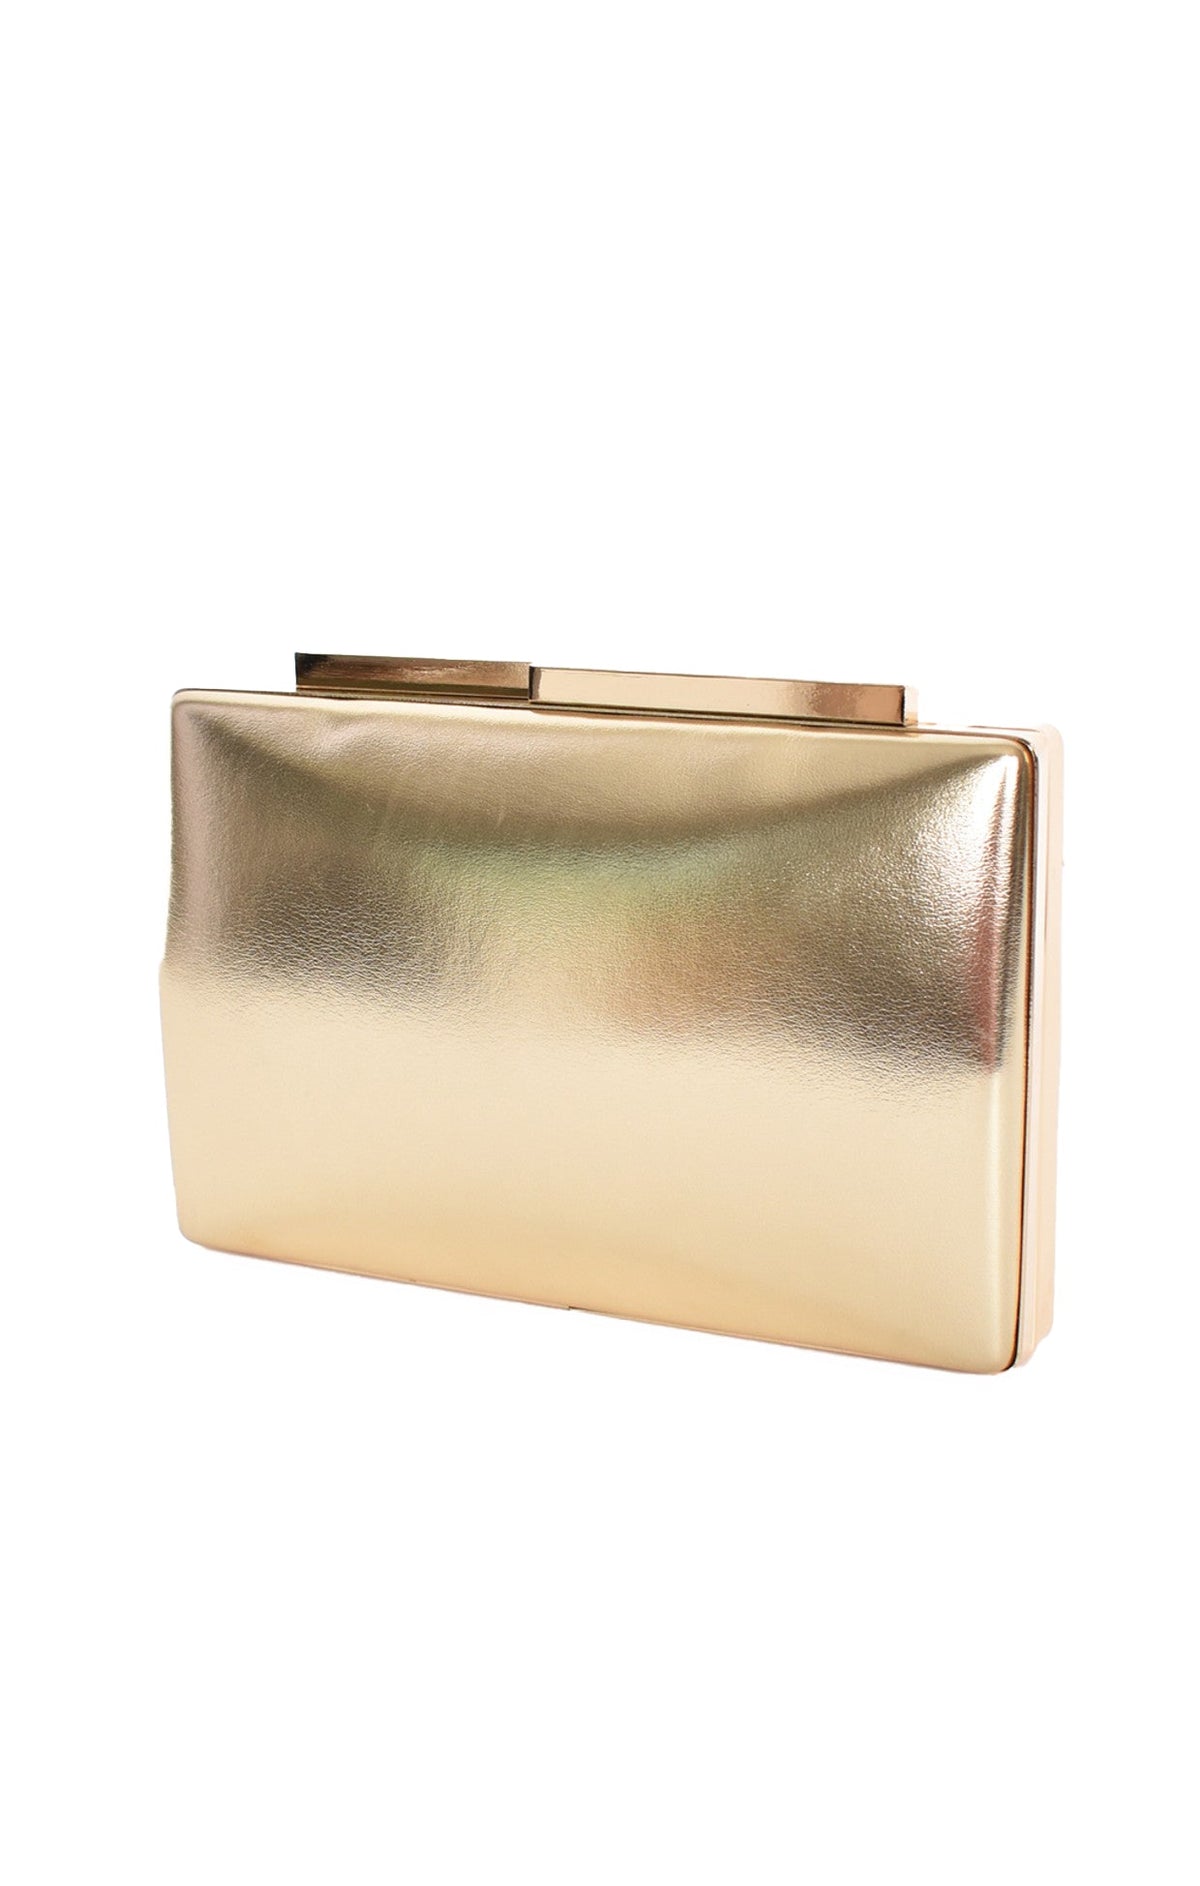 ACCESSORIES Bags Clutches One Size / Neutral METALLIC STRUCTURED CLUTCH IN GOLD